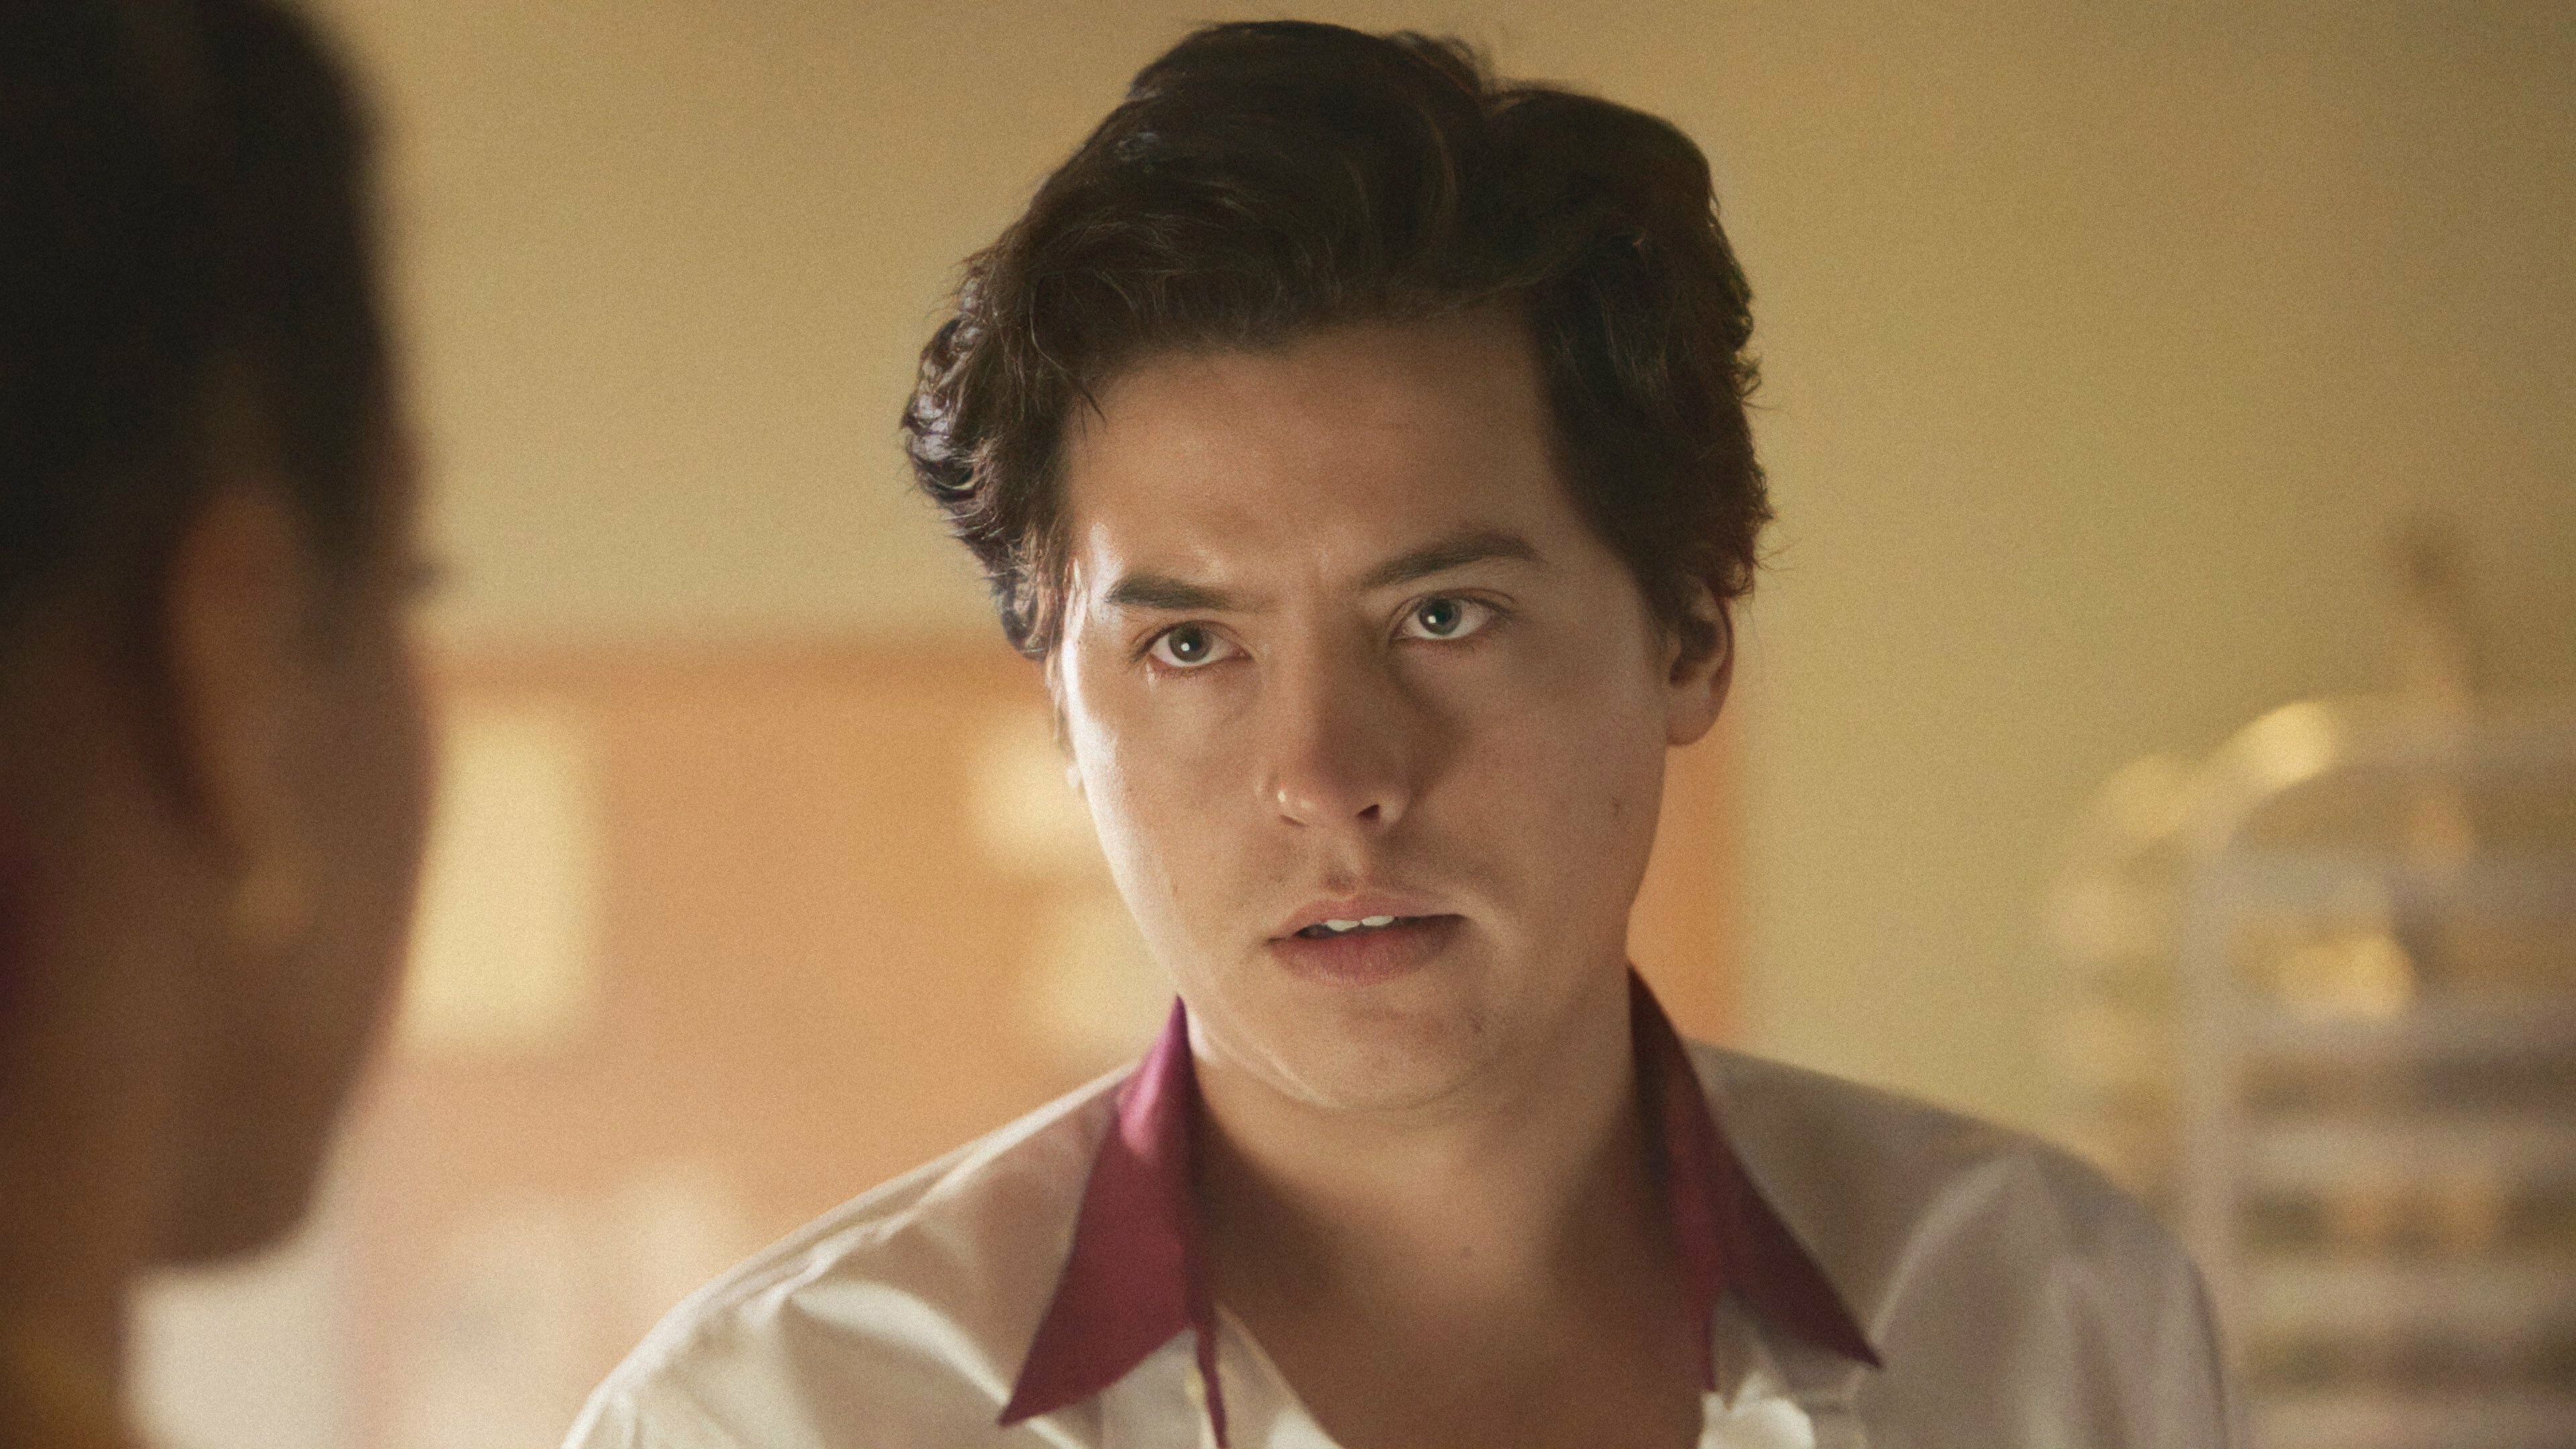 HD wallpaper, Chapter One Hundred And One, Riverdale Episode, Desktop 4K Cole Sprouse Wallpaper Image, Cole Sprouse Tv Shows, 3840X2160 4K Desktop